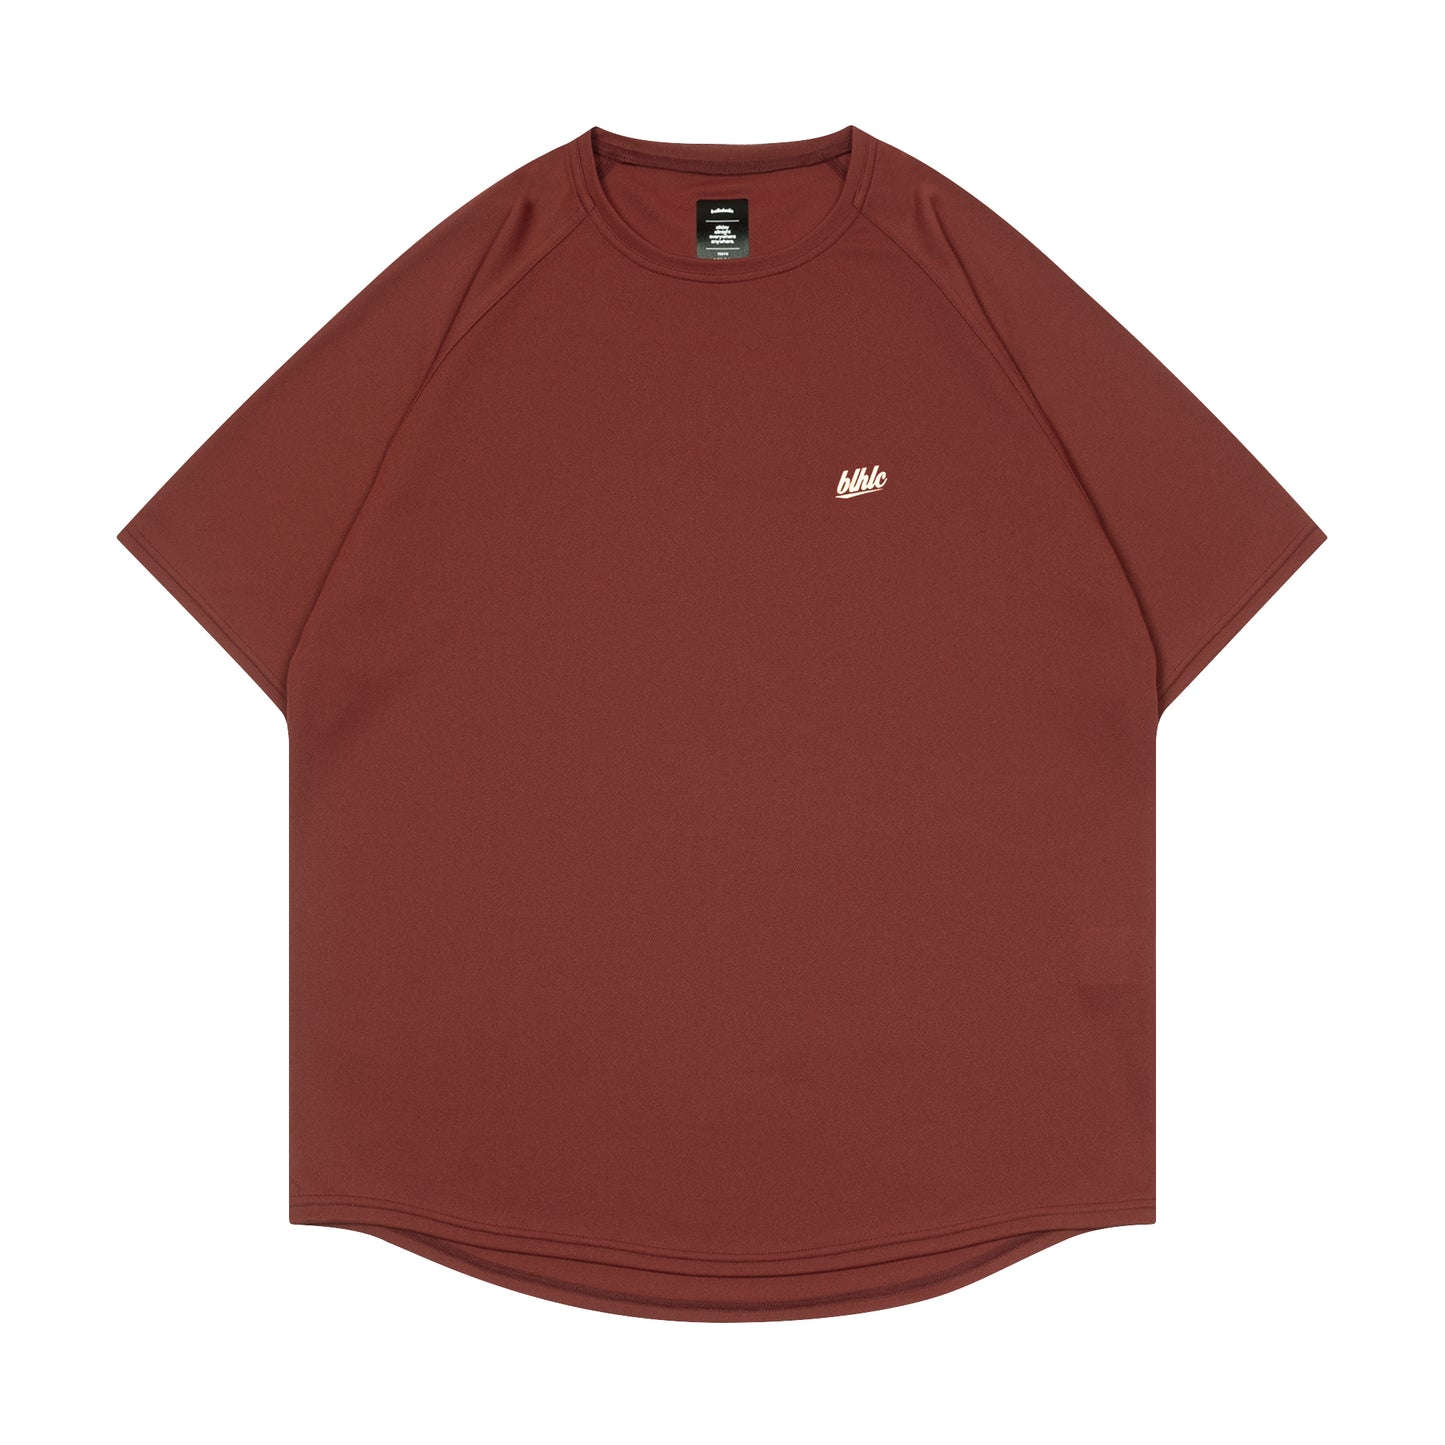 blhlc Cool Tee (barn red/off white)